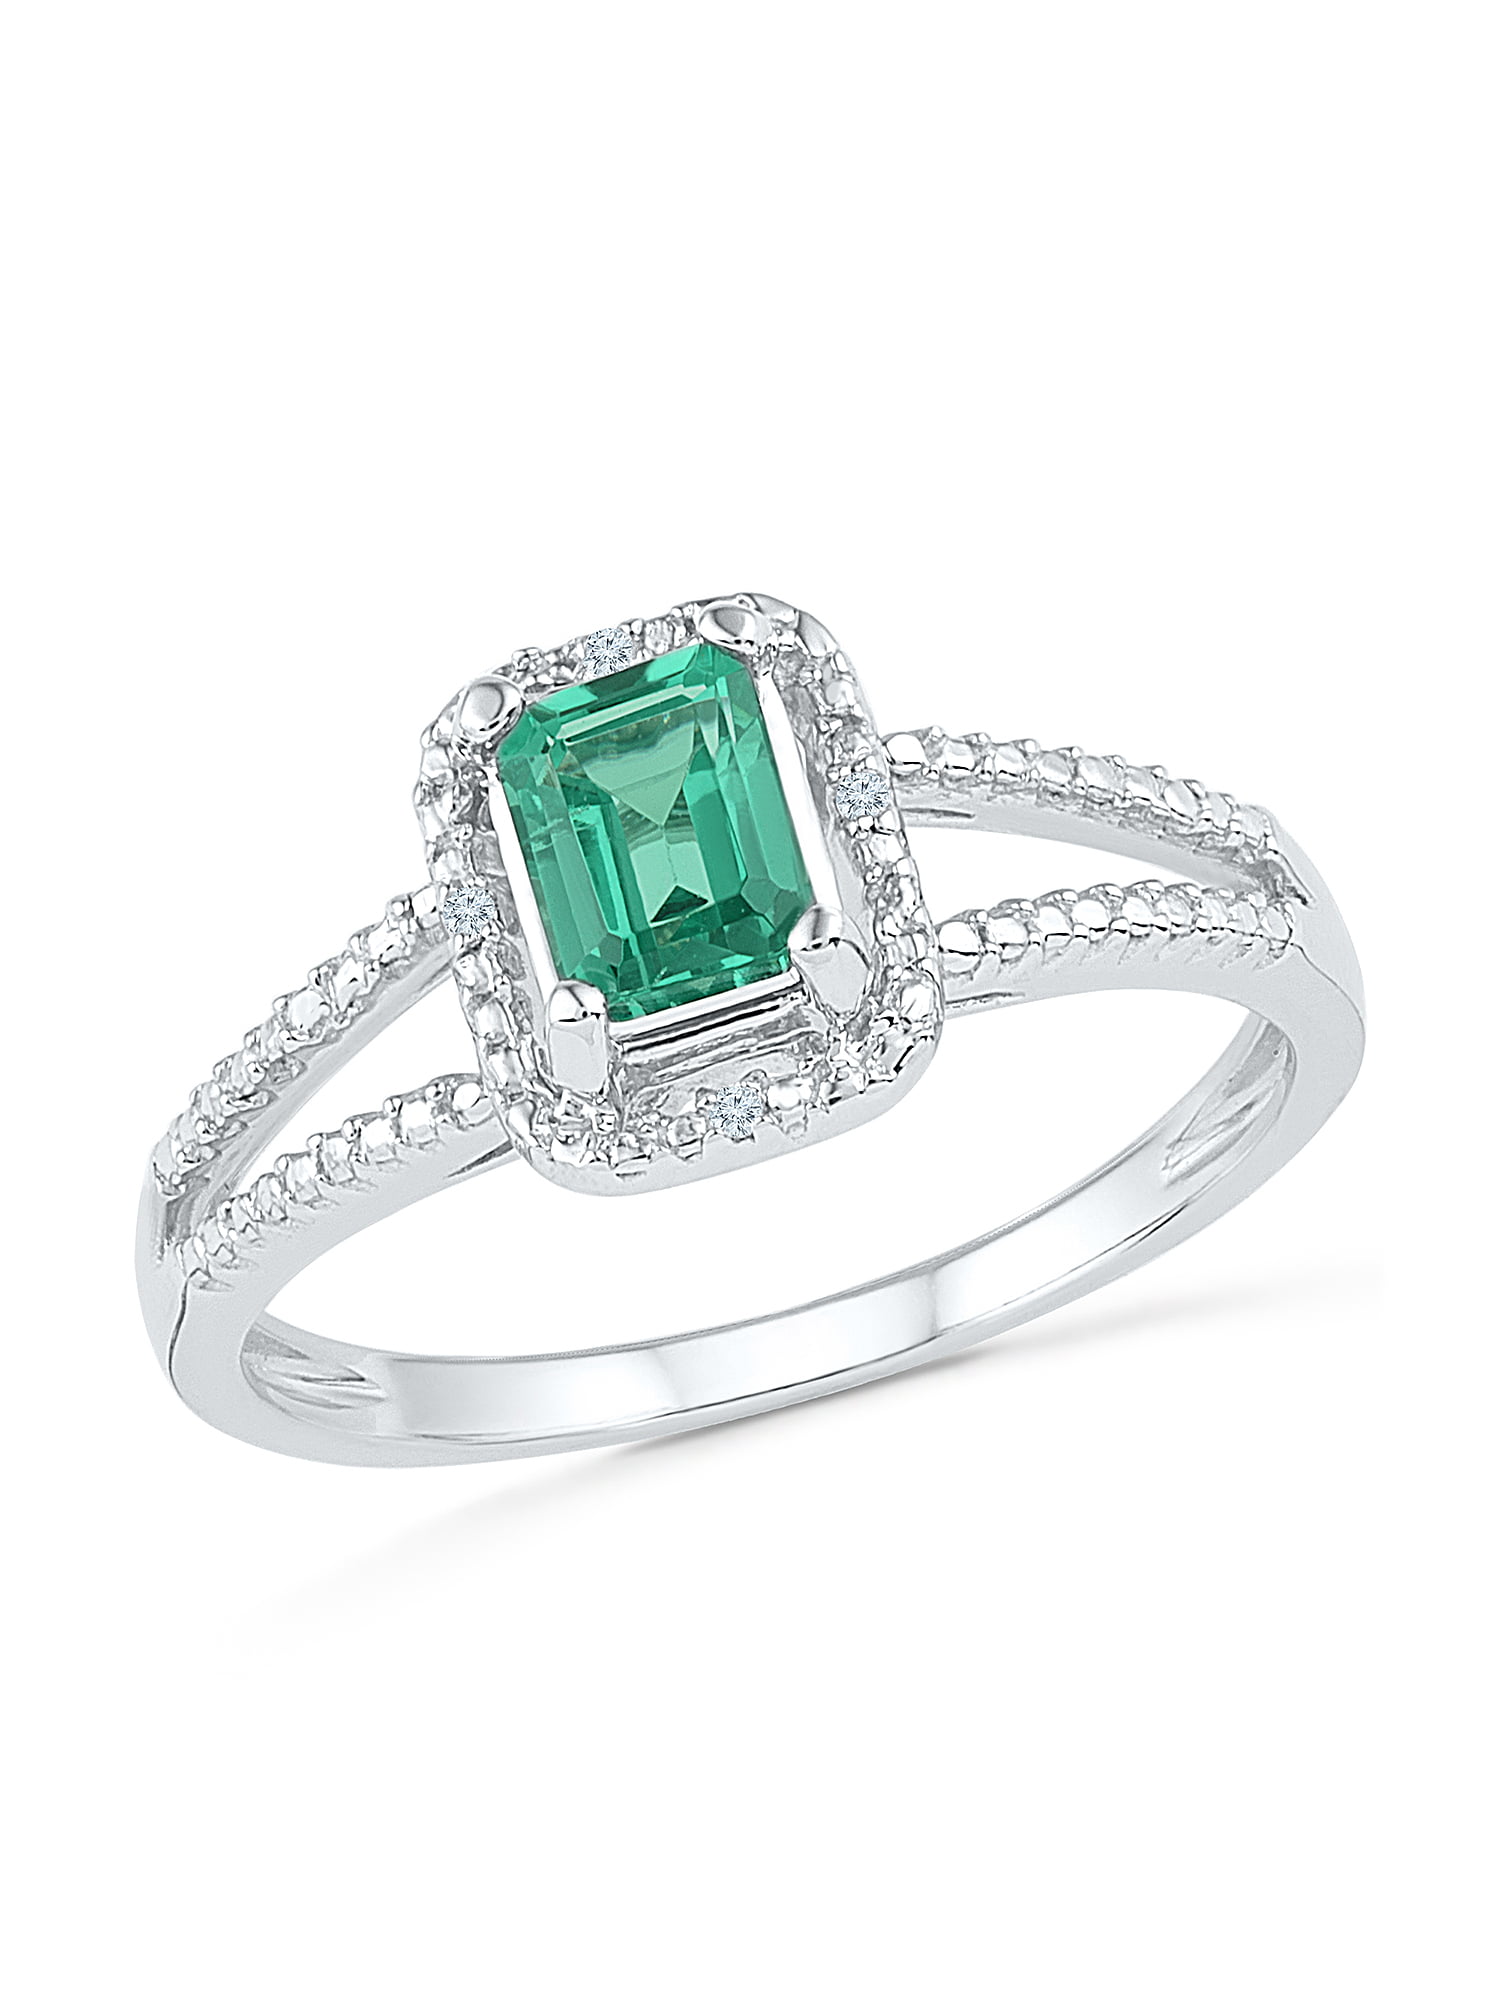 0.01 CTTW STERLING SILVER LAB CREATED EMERALD ENGAGEMENT RING - Walmart.com